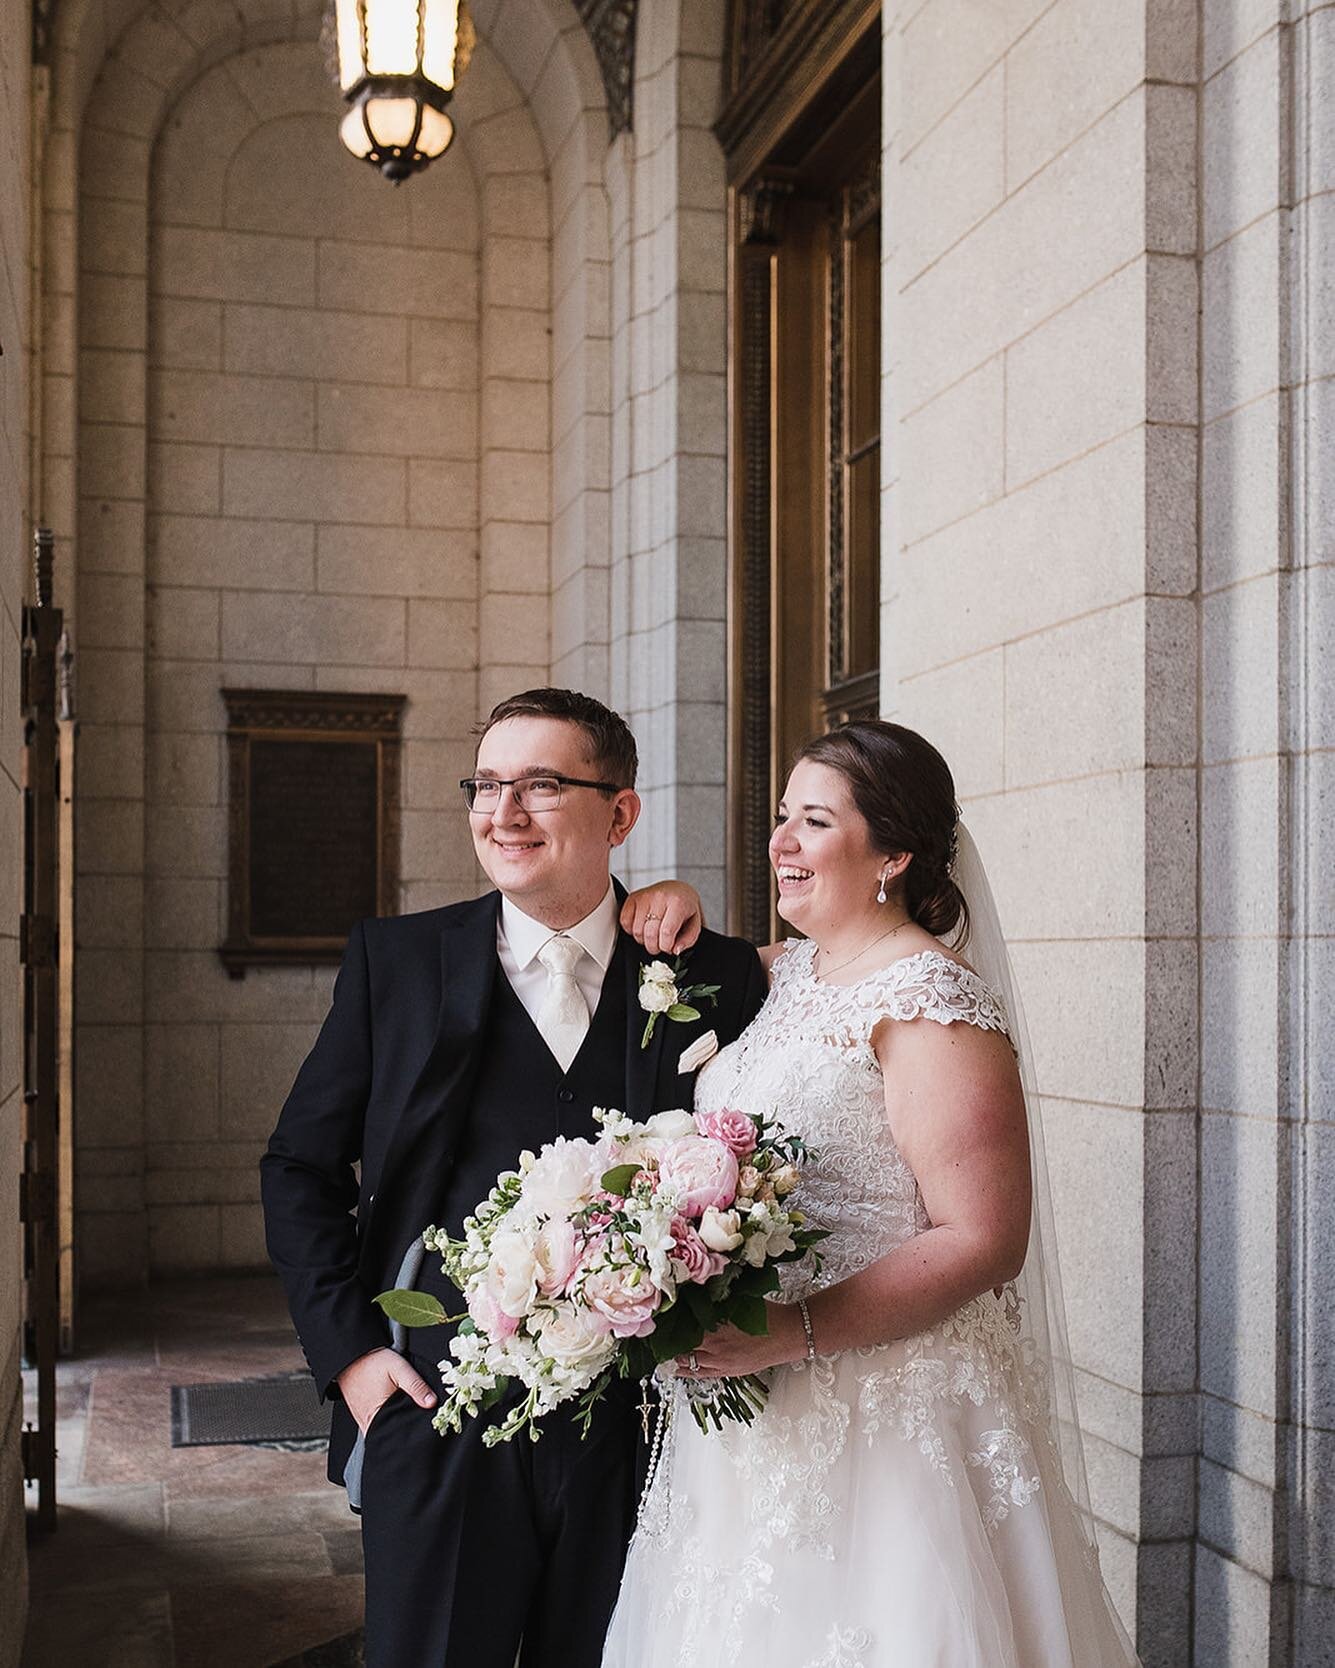 &quot;True love is when both people think they are the lucky one.&quot;
-Unknown
.
Photo:  @sandragrunzinger
. 
#brideandgroom #brideandgroomphotography #wedding #weddingplanner #weddingplanning #stlwedding #stlweddingplanner #saintlouisweddings #sai